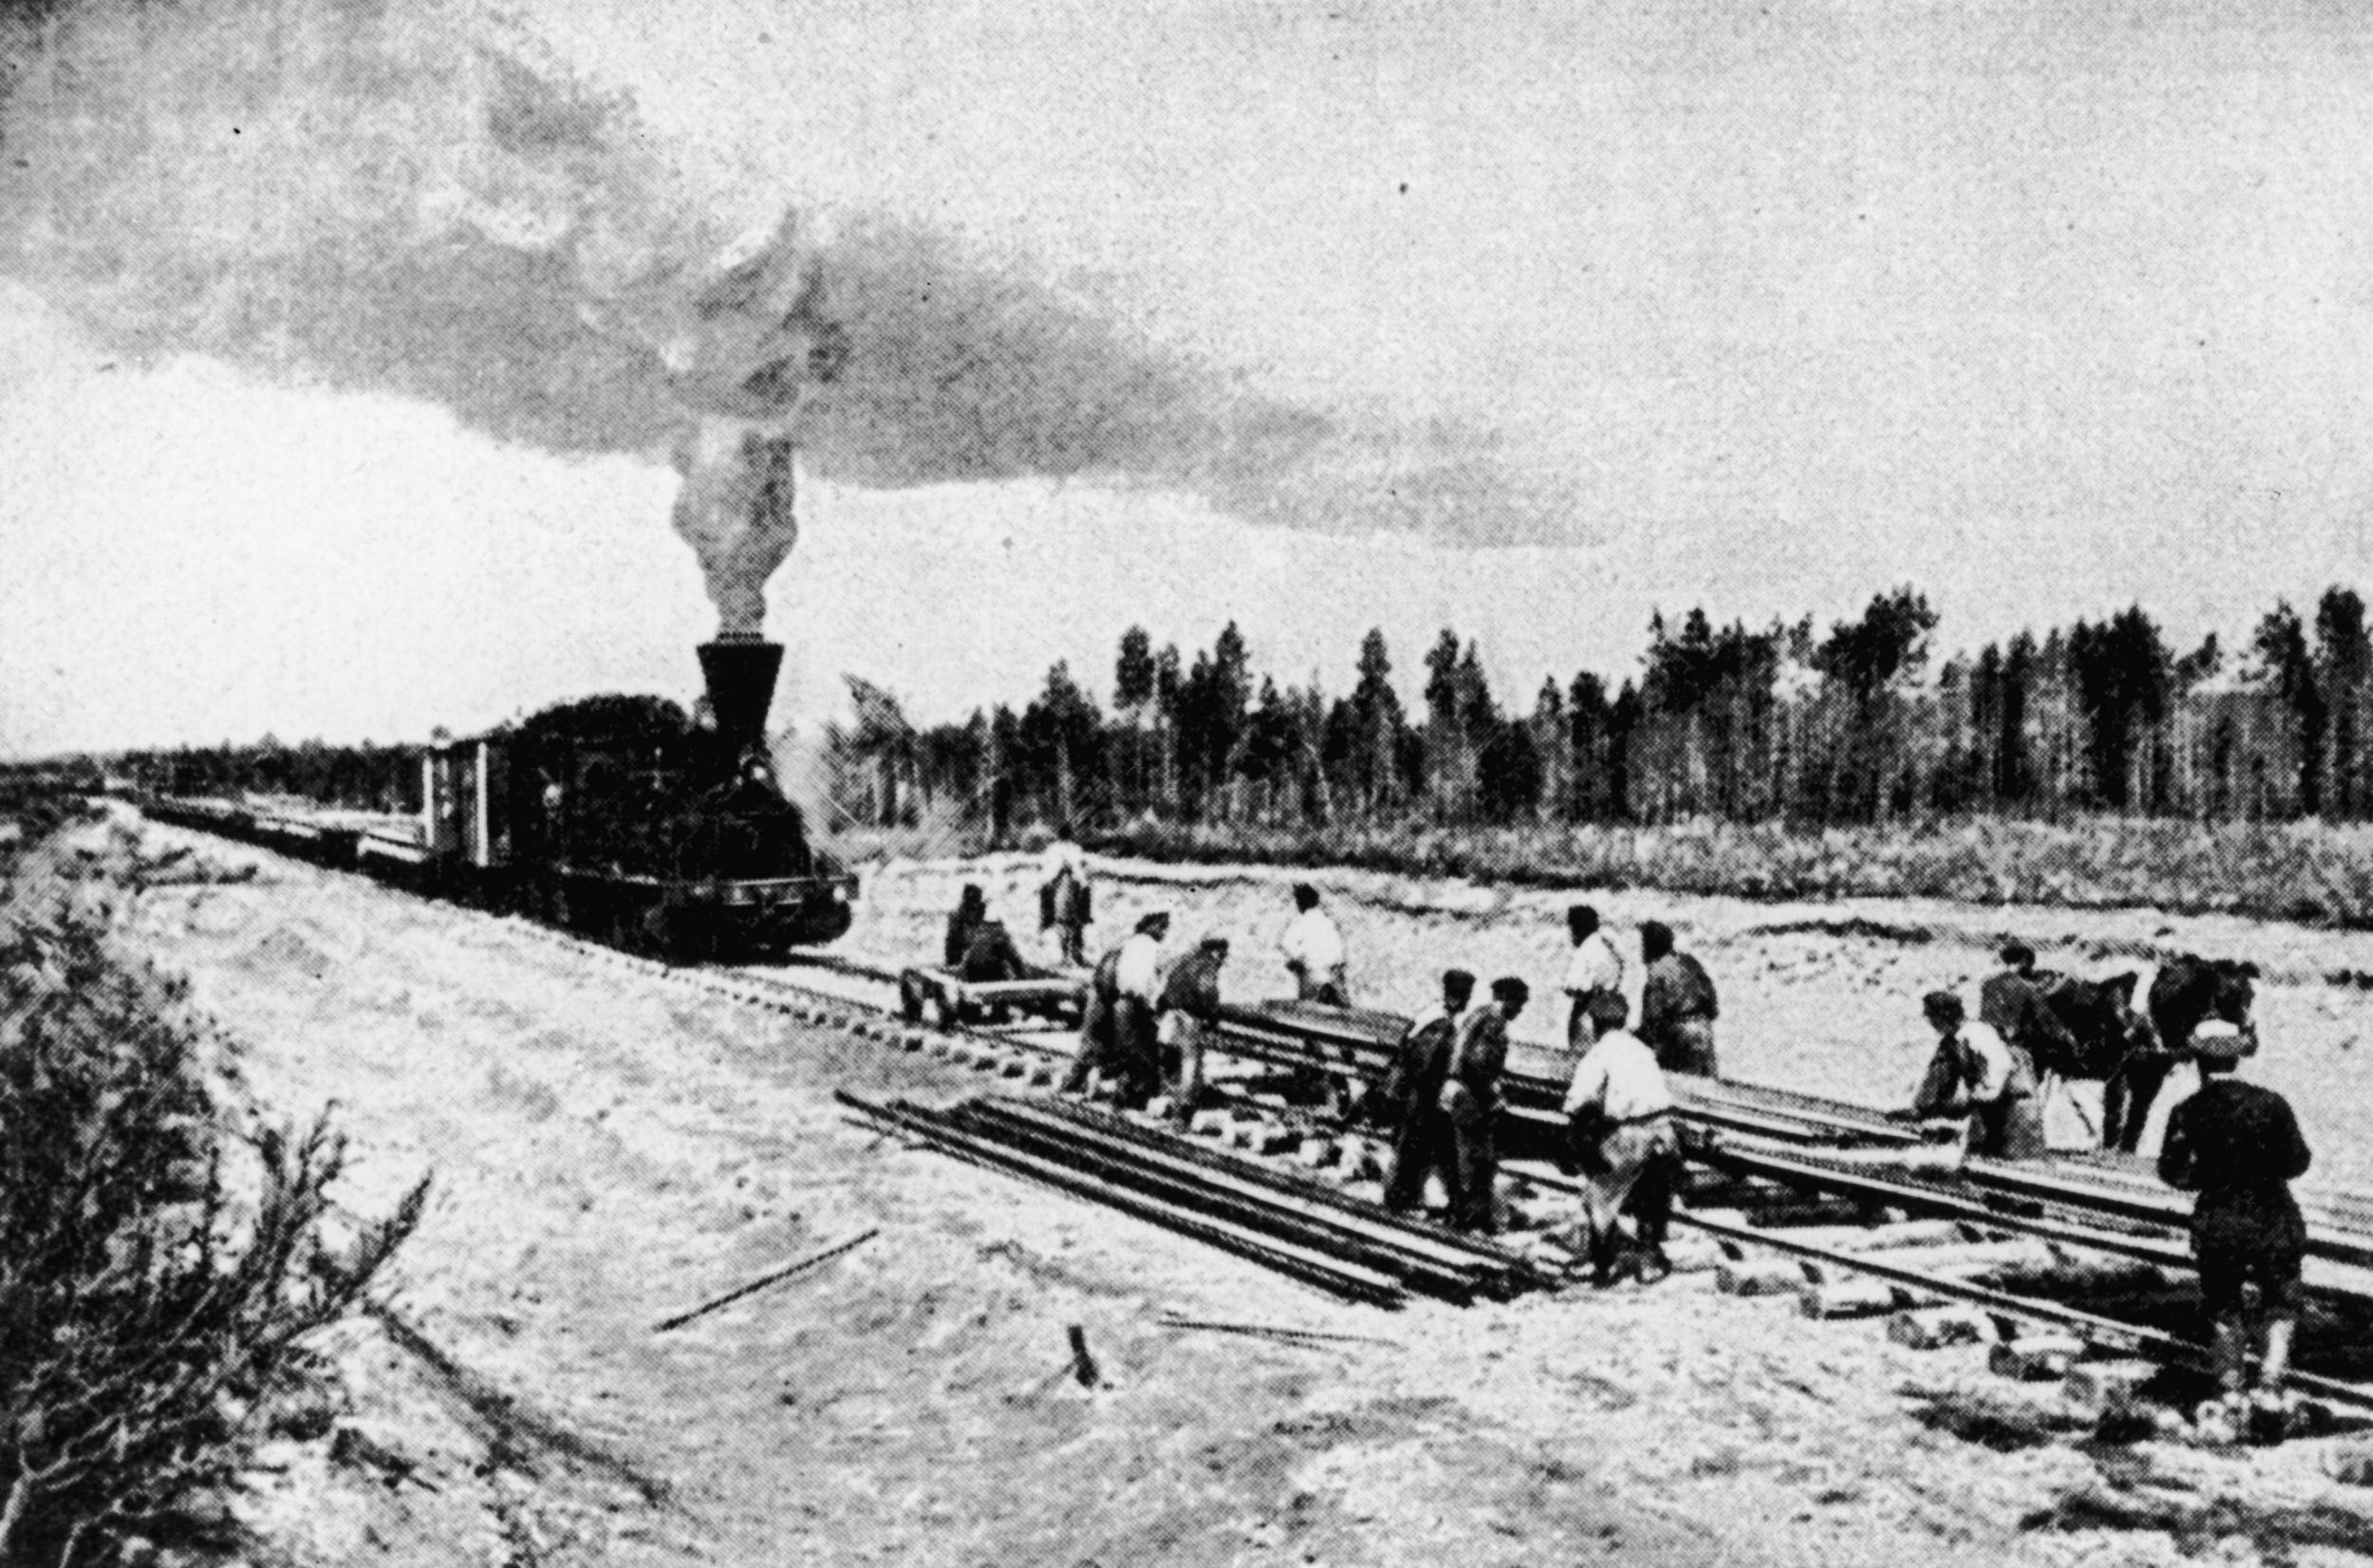 Labourers worked to build the tracks in 1903